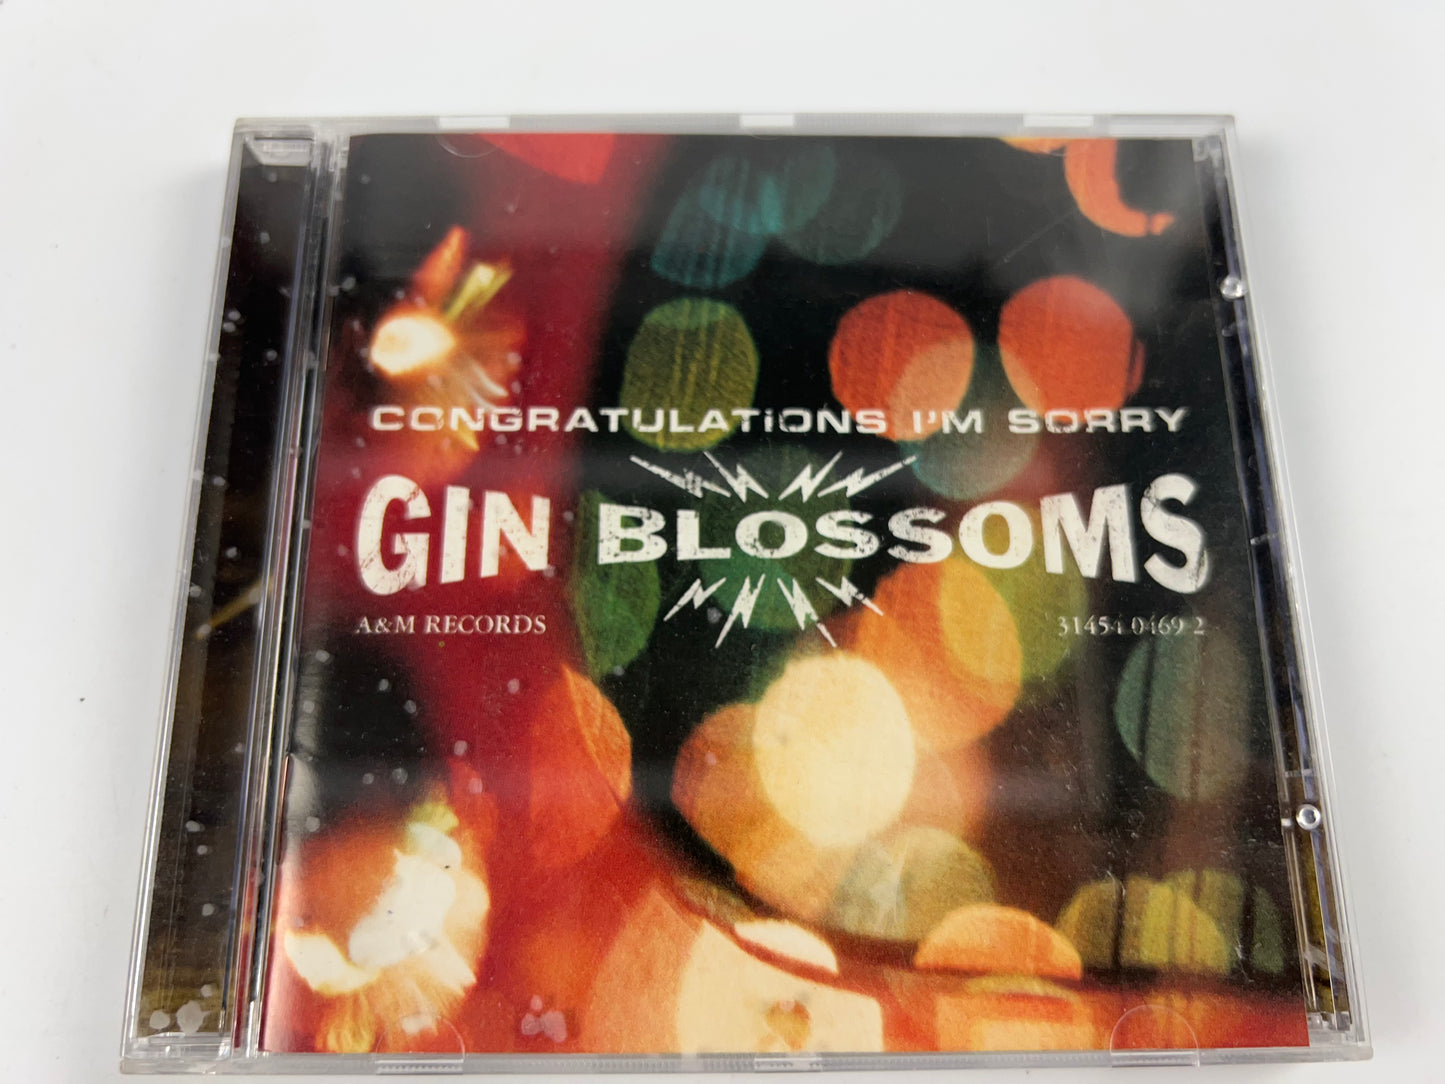 Congratulations I'm Sorry - Audio CD By Gin Blossoms